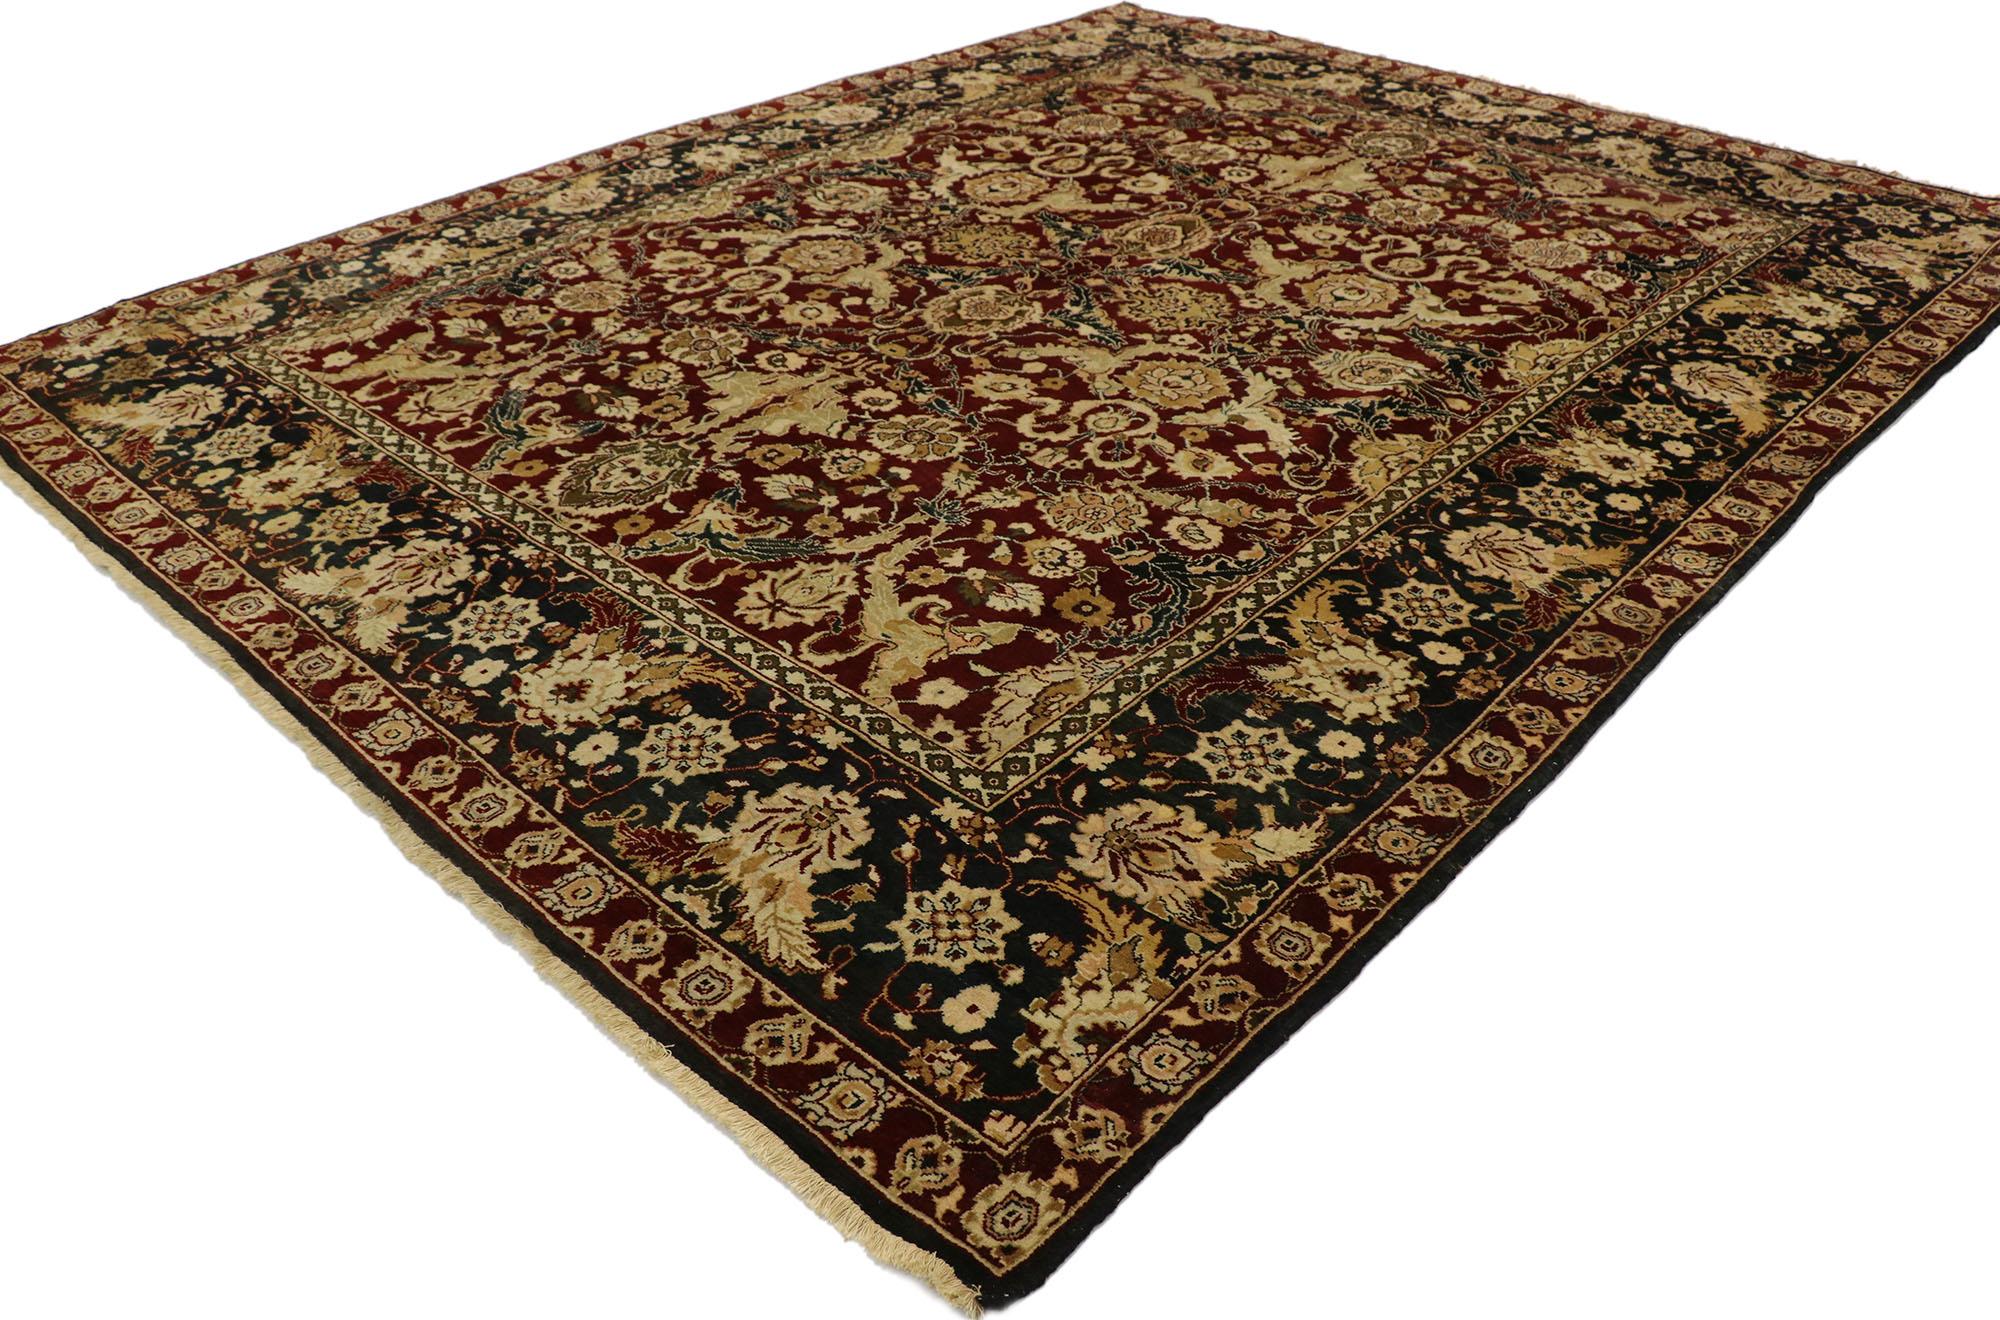 77554 traditional vintage Indian rug with Baroque Damask style. Sure to captivate the most discerning aesthete, this hand knotted wool vintage Indian area rug is the epitome of tradition and Baroque style in one. The rich burgundy wine colored field